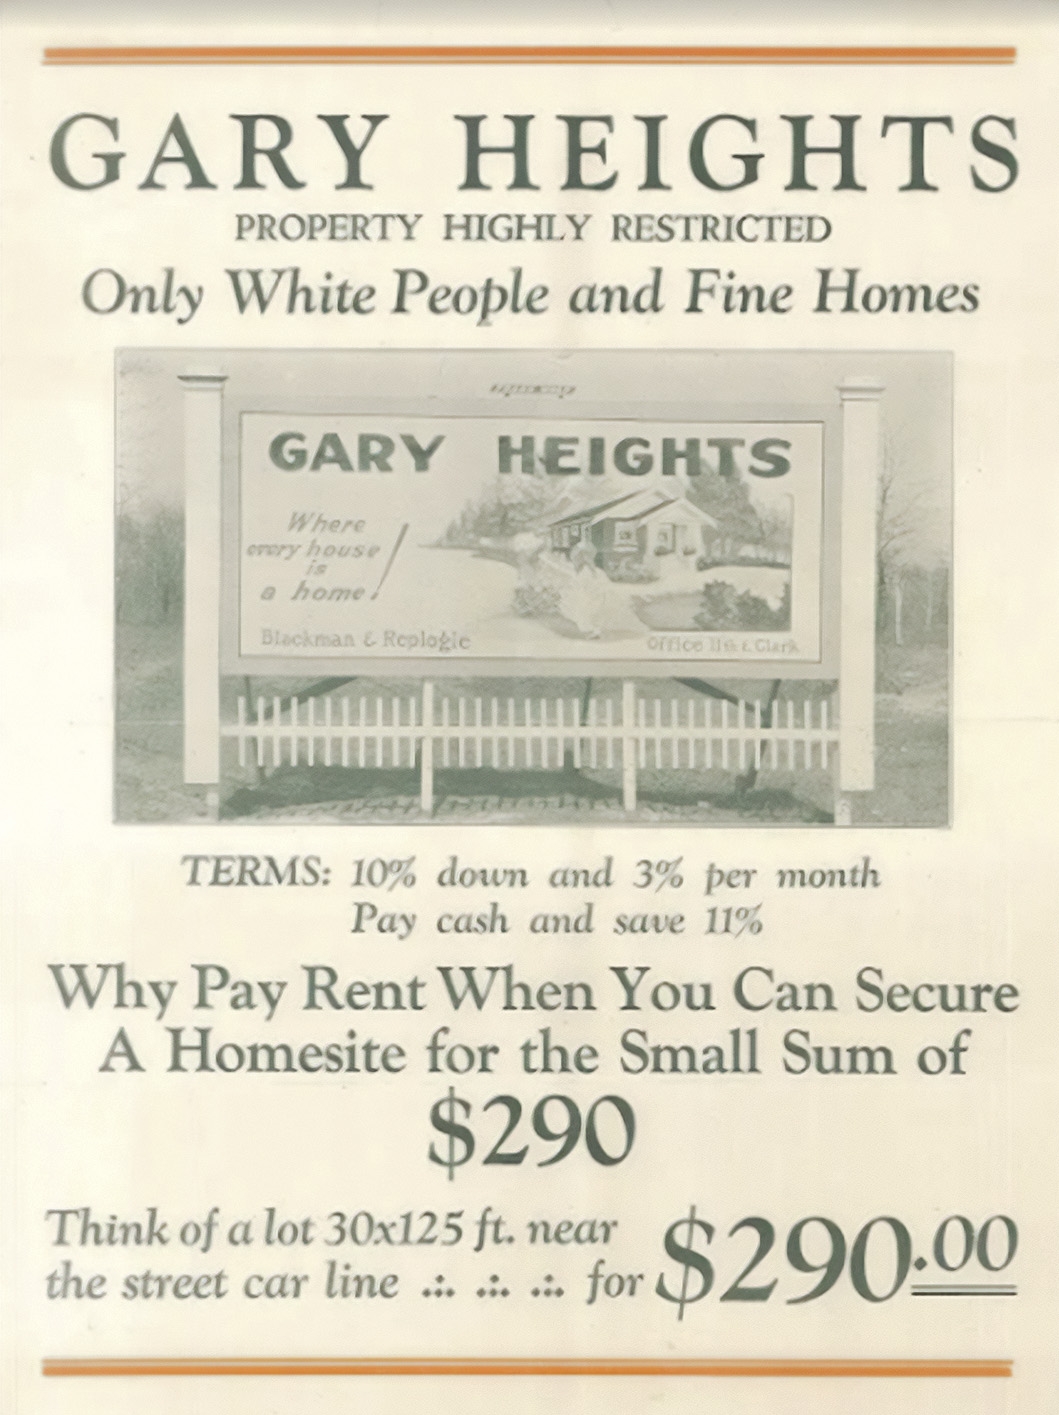 An advertising booklet for Gary Heights, Indiana, highlighting its restricted nature of "Only White People and Fine Homes" from the mid-1920s.